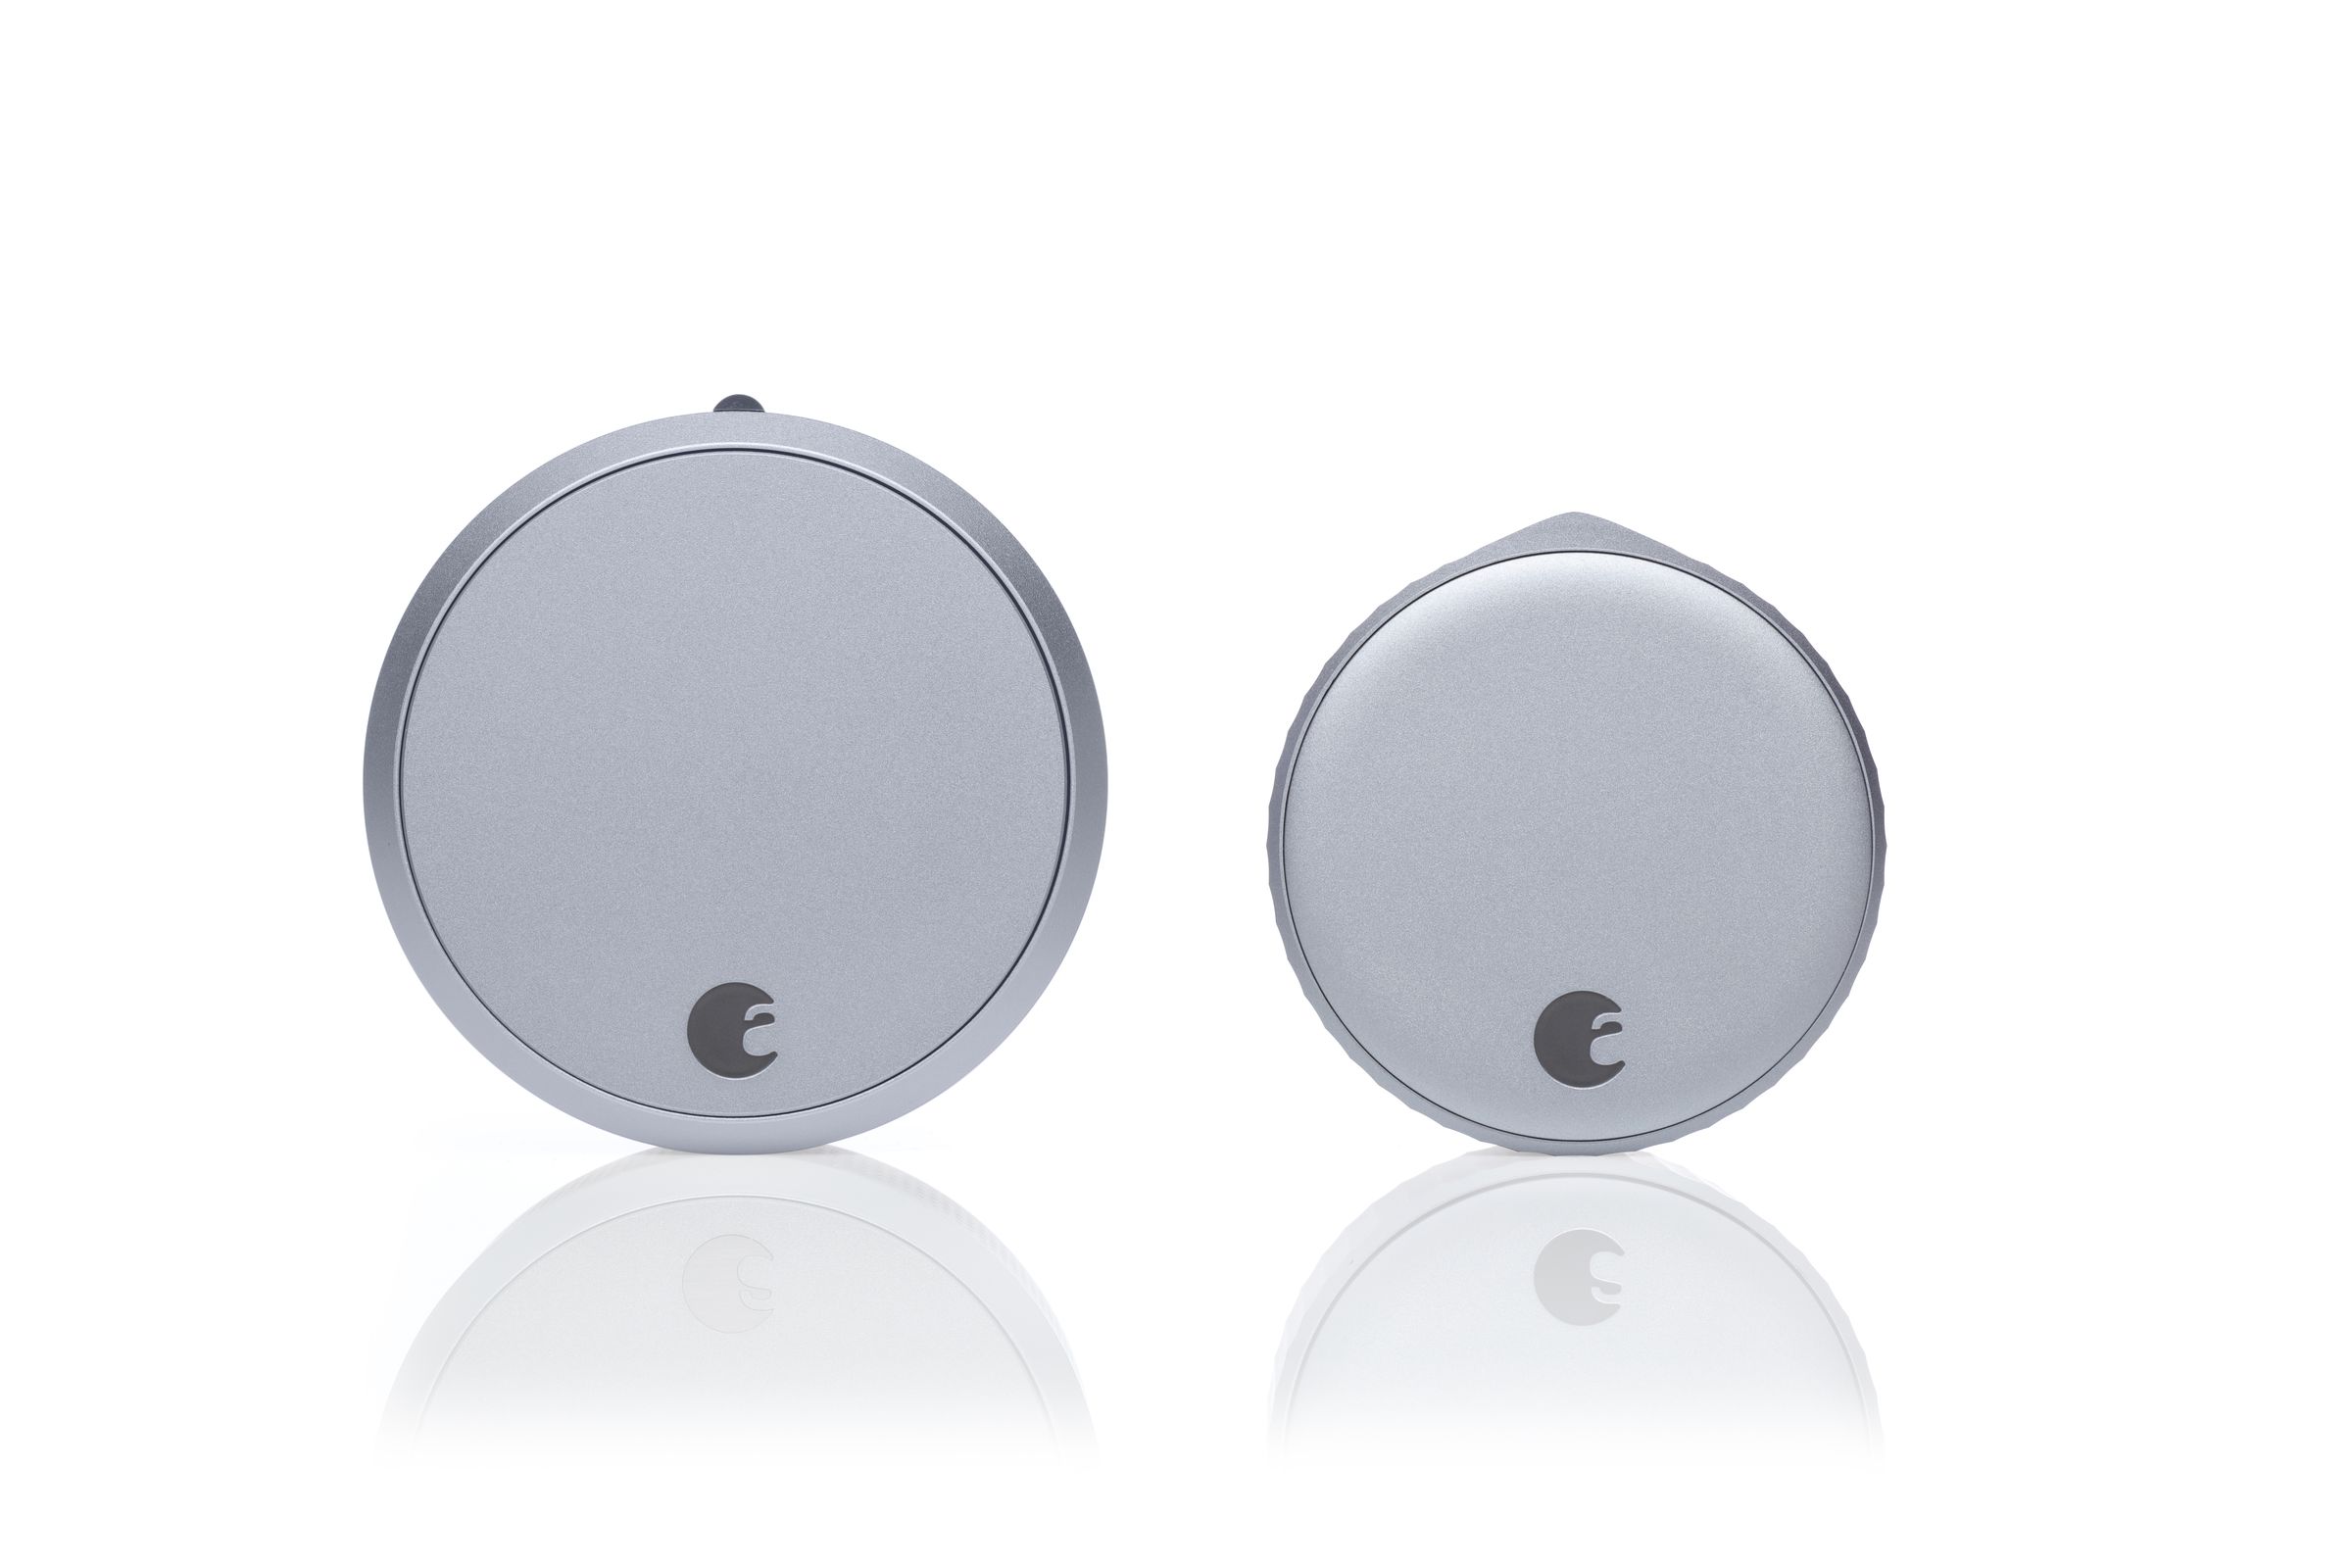 An August Smart Lock Pro next to an August Wi-Fi Smart Lock on a white background